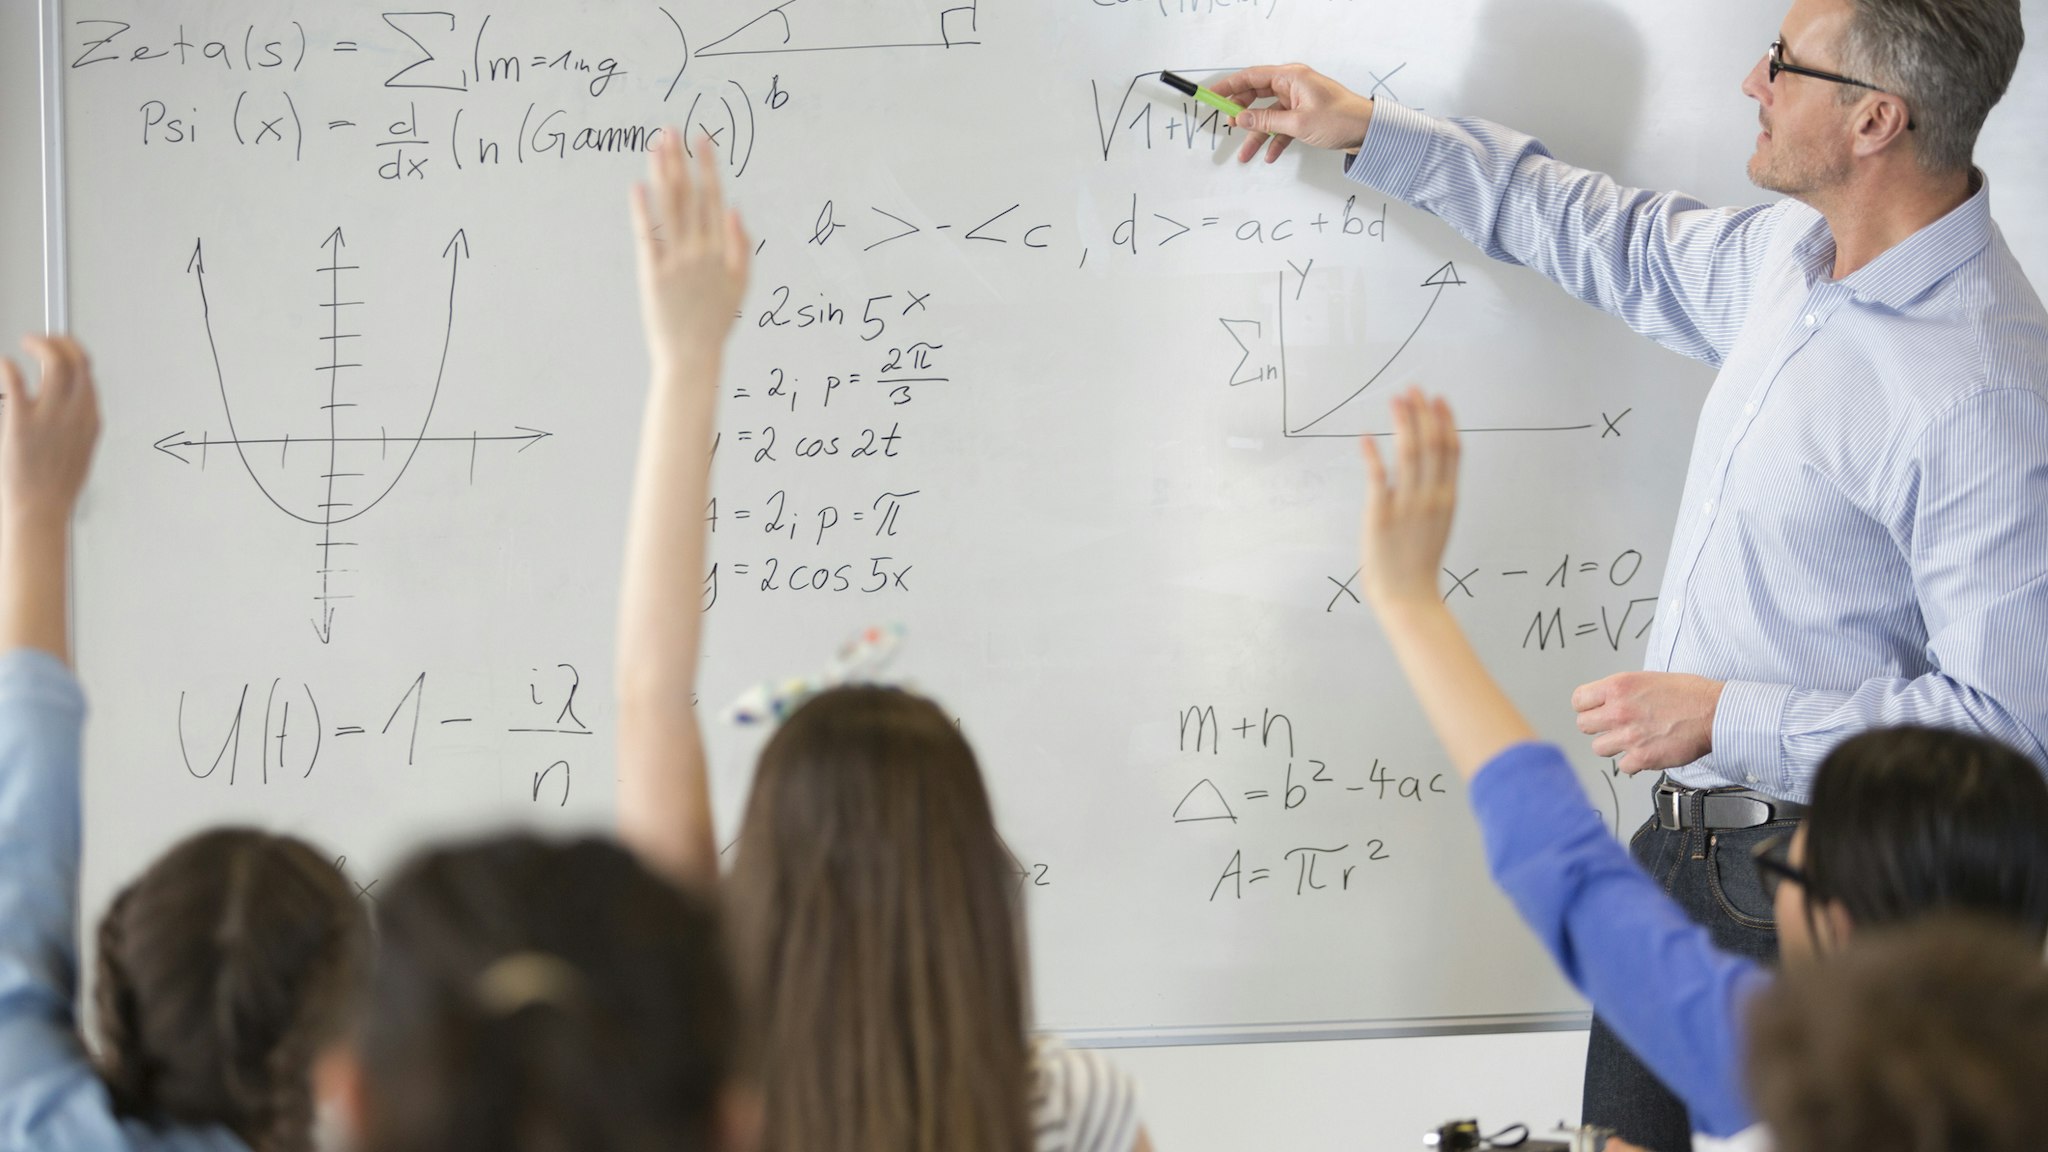 Male teacher leading physics lesson at whiteboard in classroom